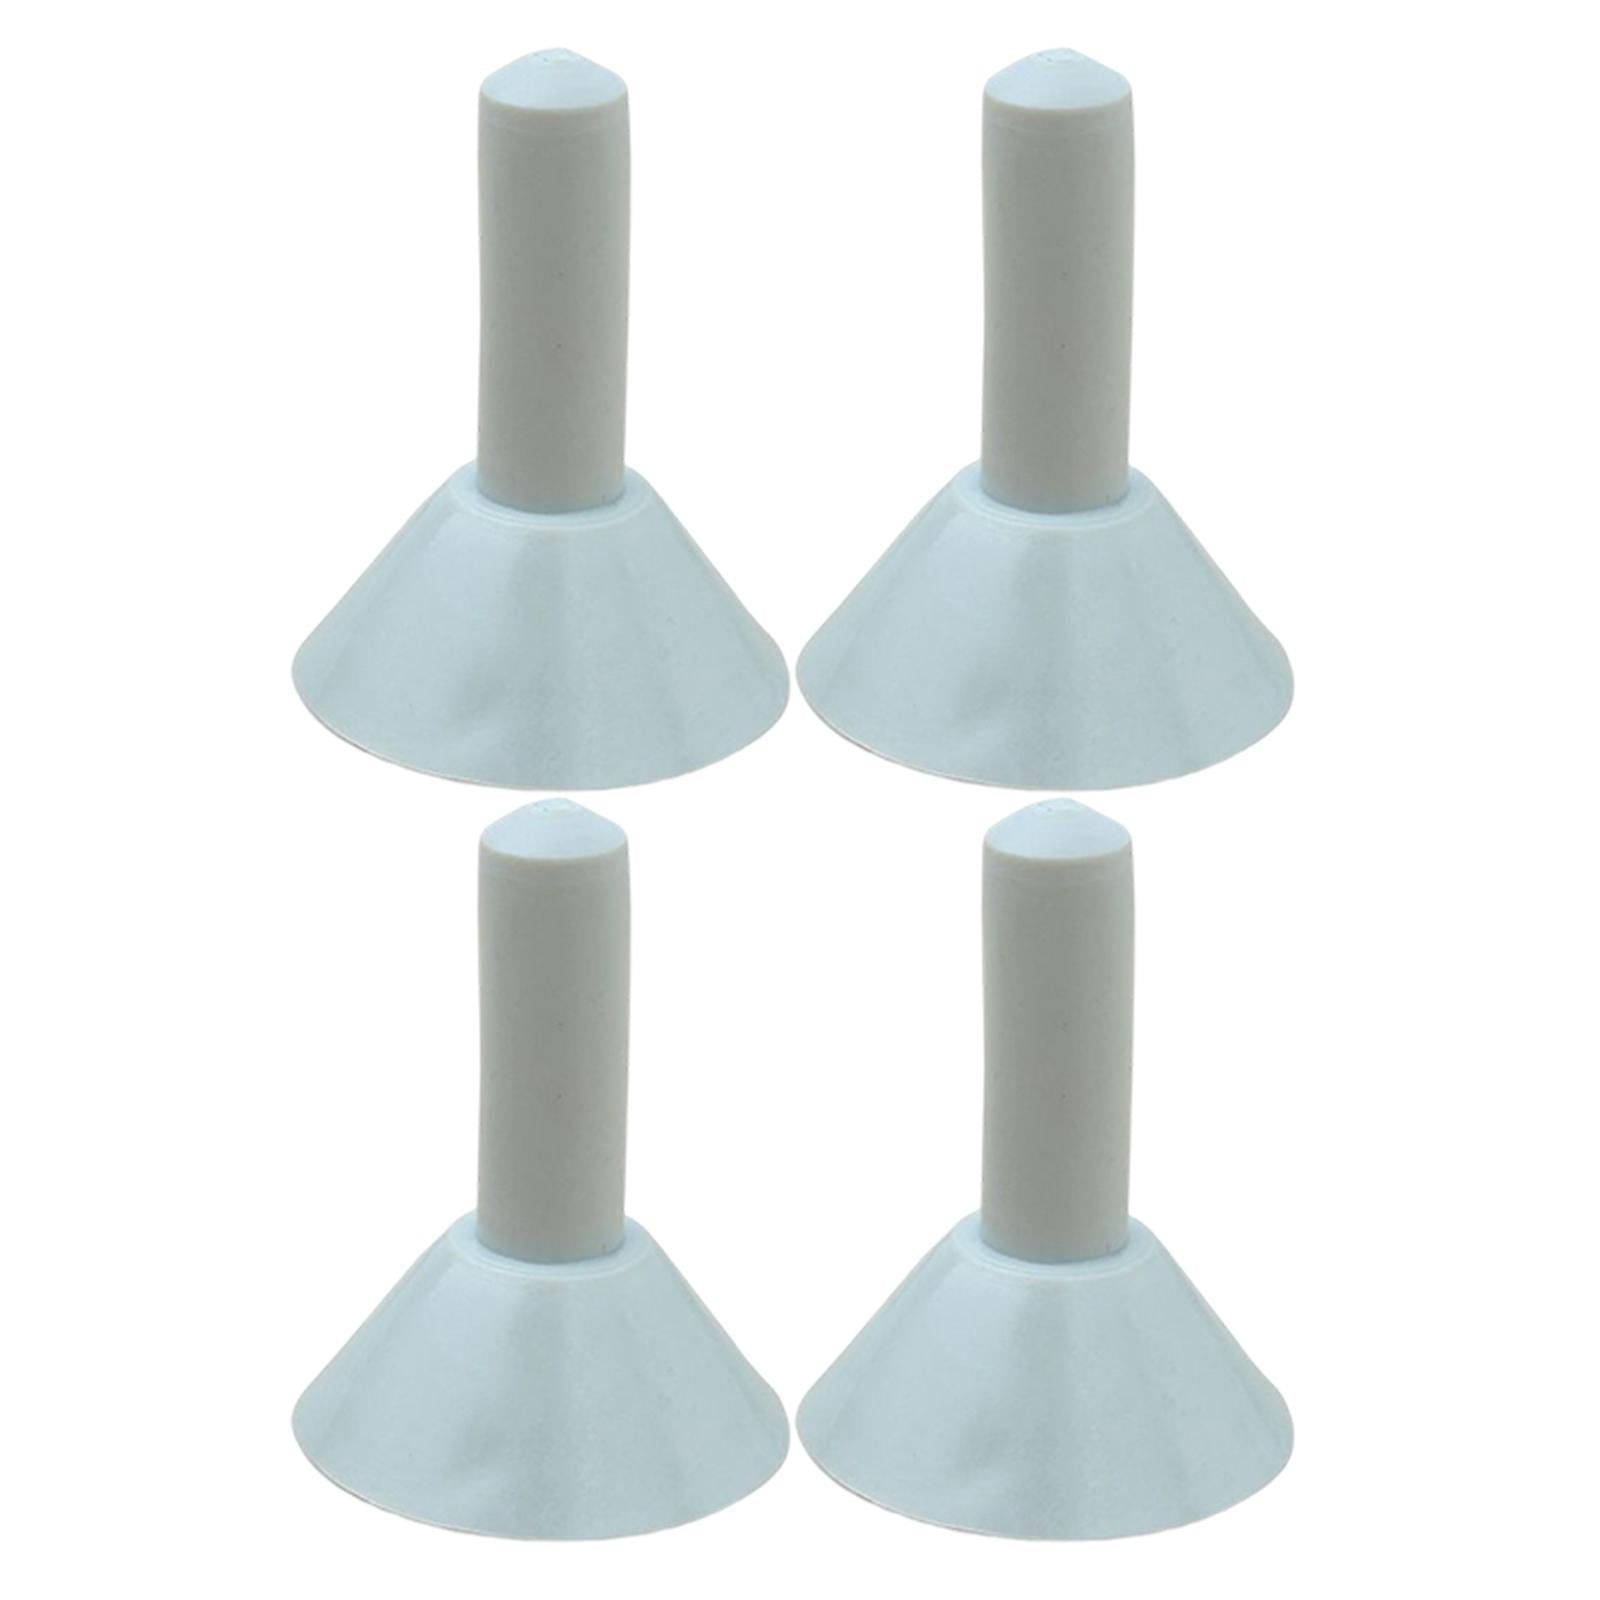 4 Pieces Tent Pole Insulation Protection Caps Insulating for Hiking Camping Grey